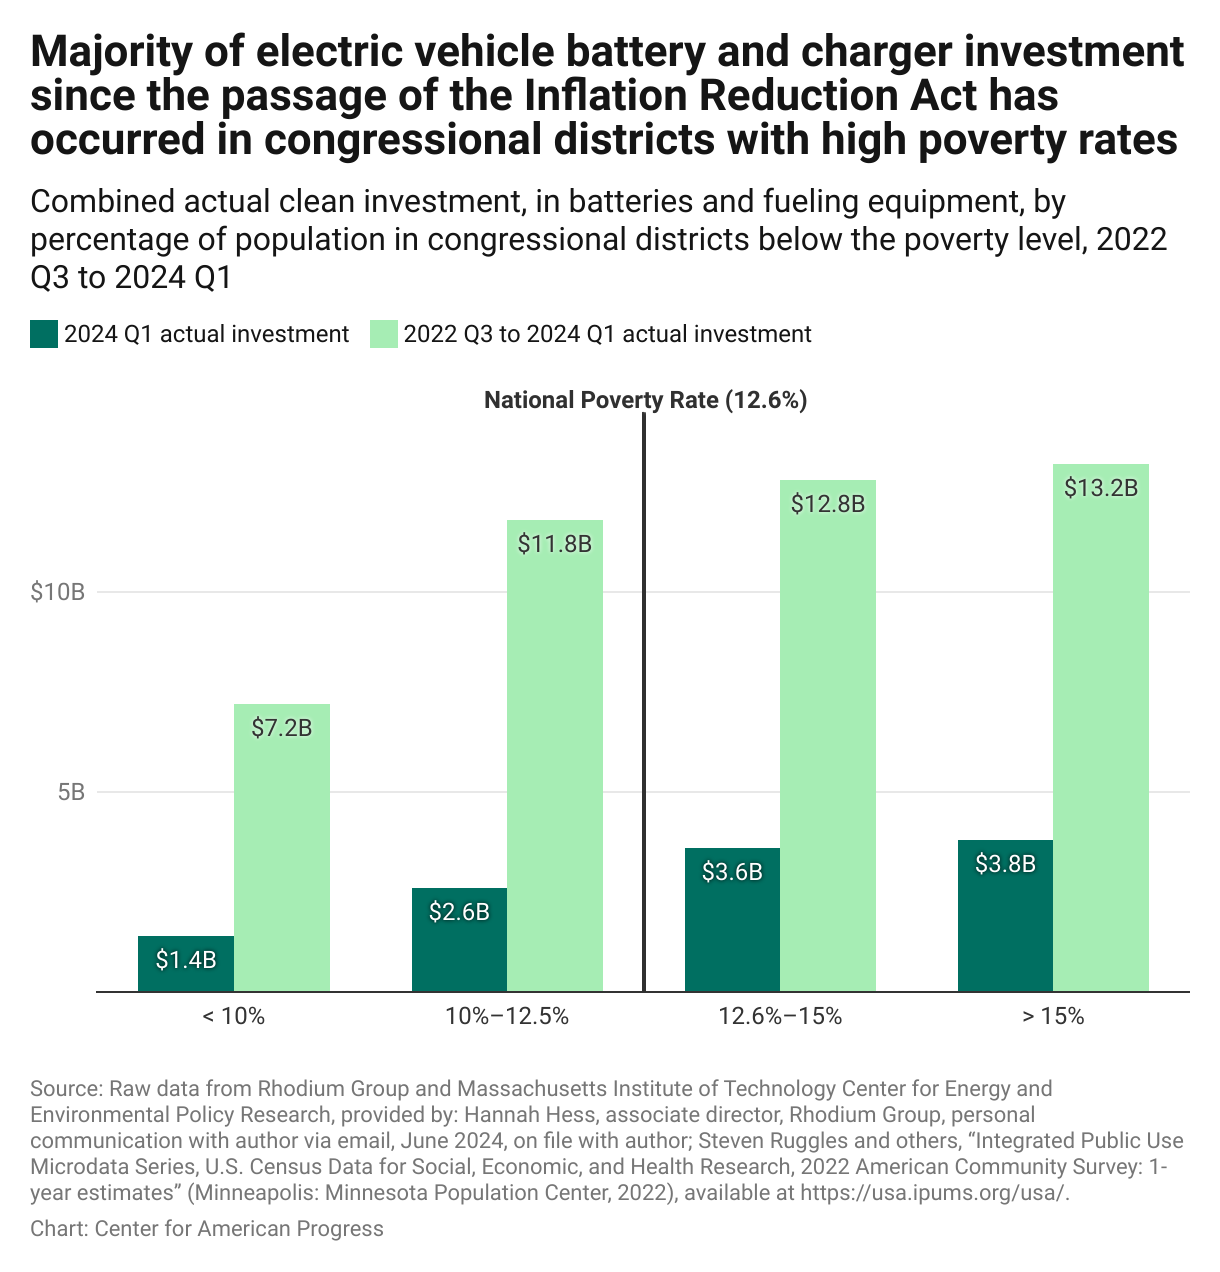 Bar graph that shows share of battery and electric vehicle charger investment in congressional districts by range of poverty rate, with the greatest share of investment—more than $26 billion since Inflation Reduction Act passage—occuring in districts with poverty rates higher than the national poverty rate. 